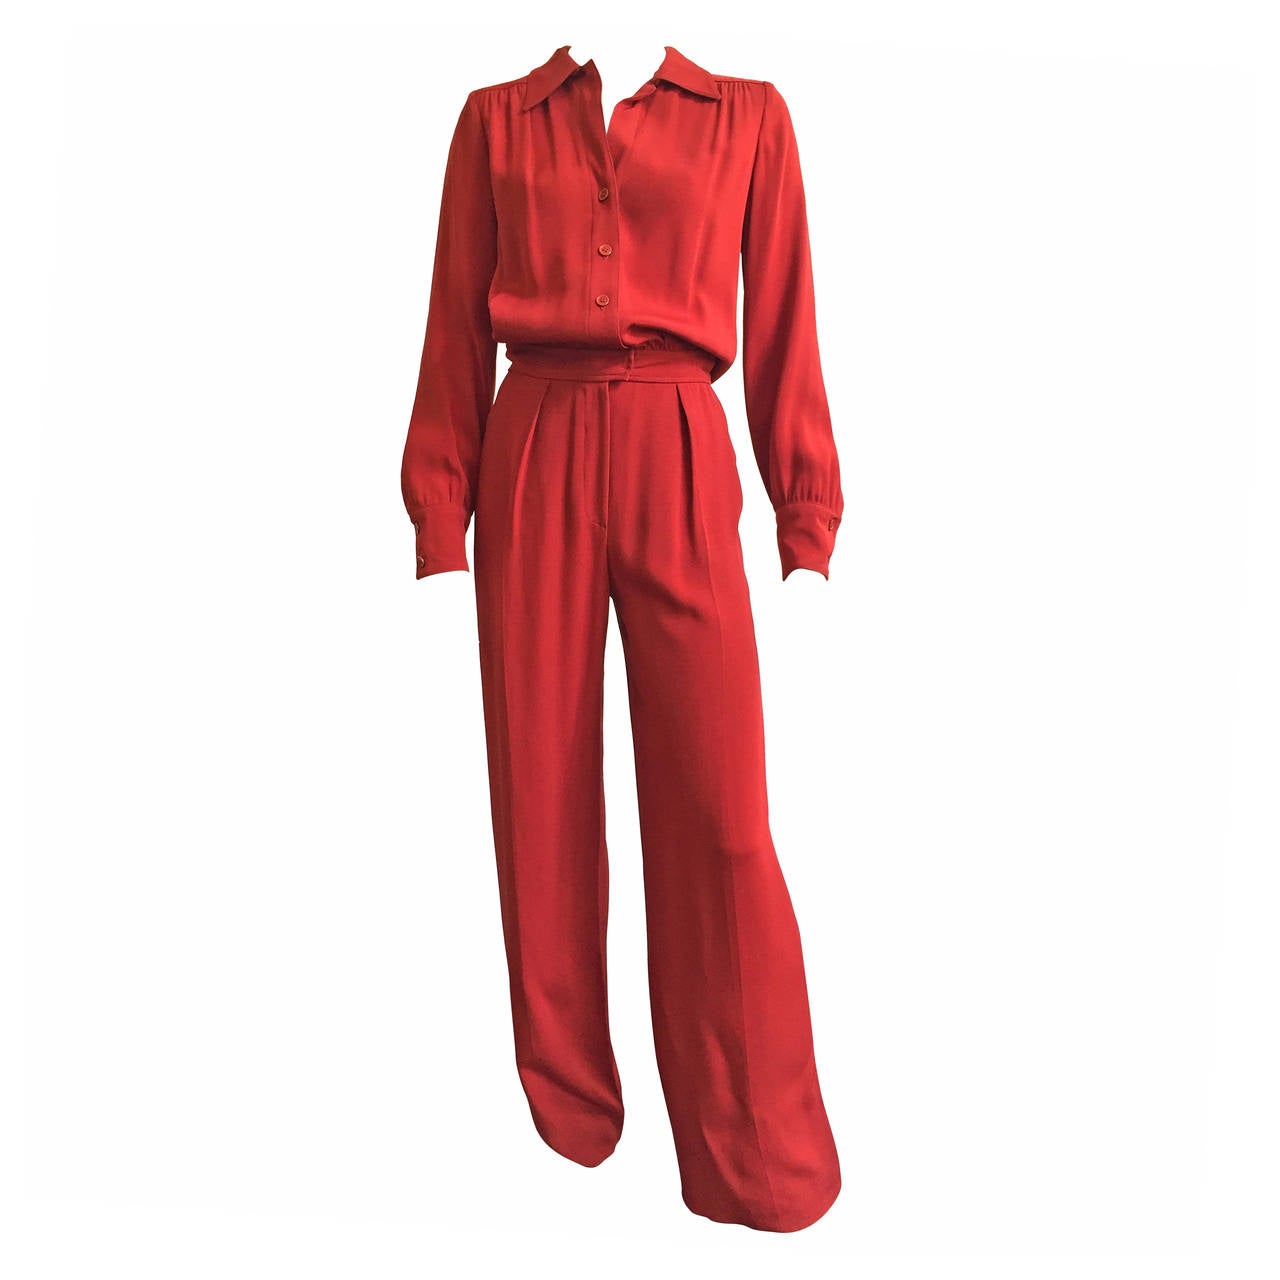 Anne Klein for I.Magnin 80s jumpsuit with pockets size 4.